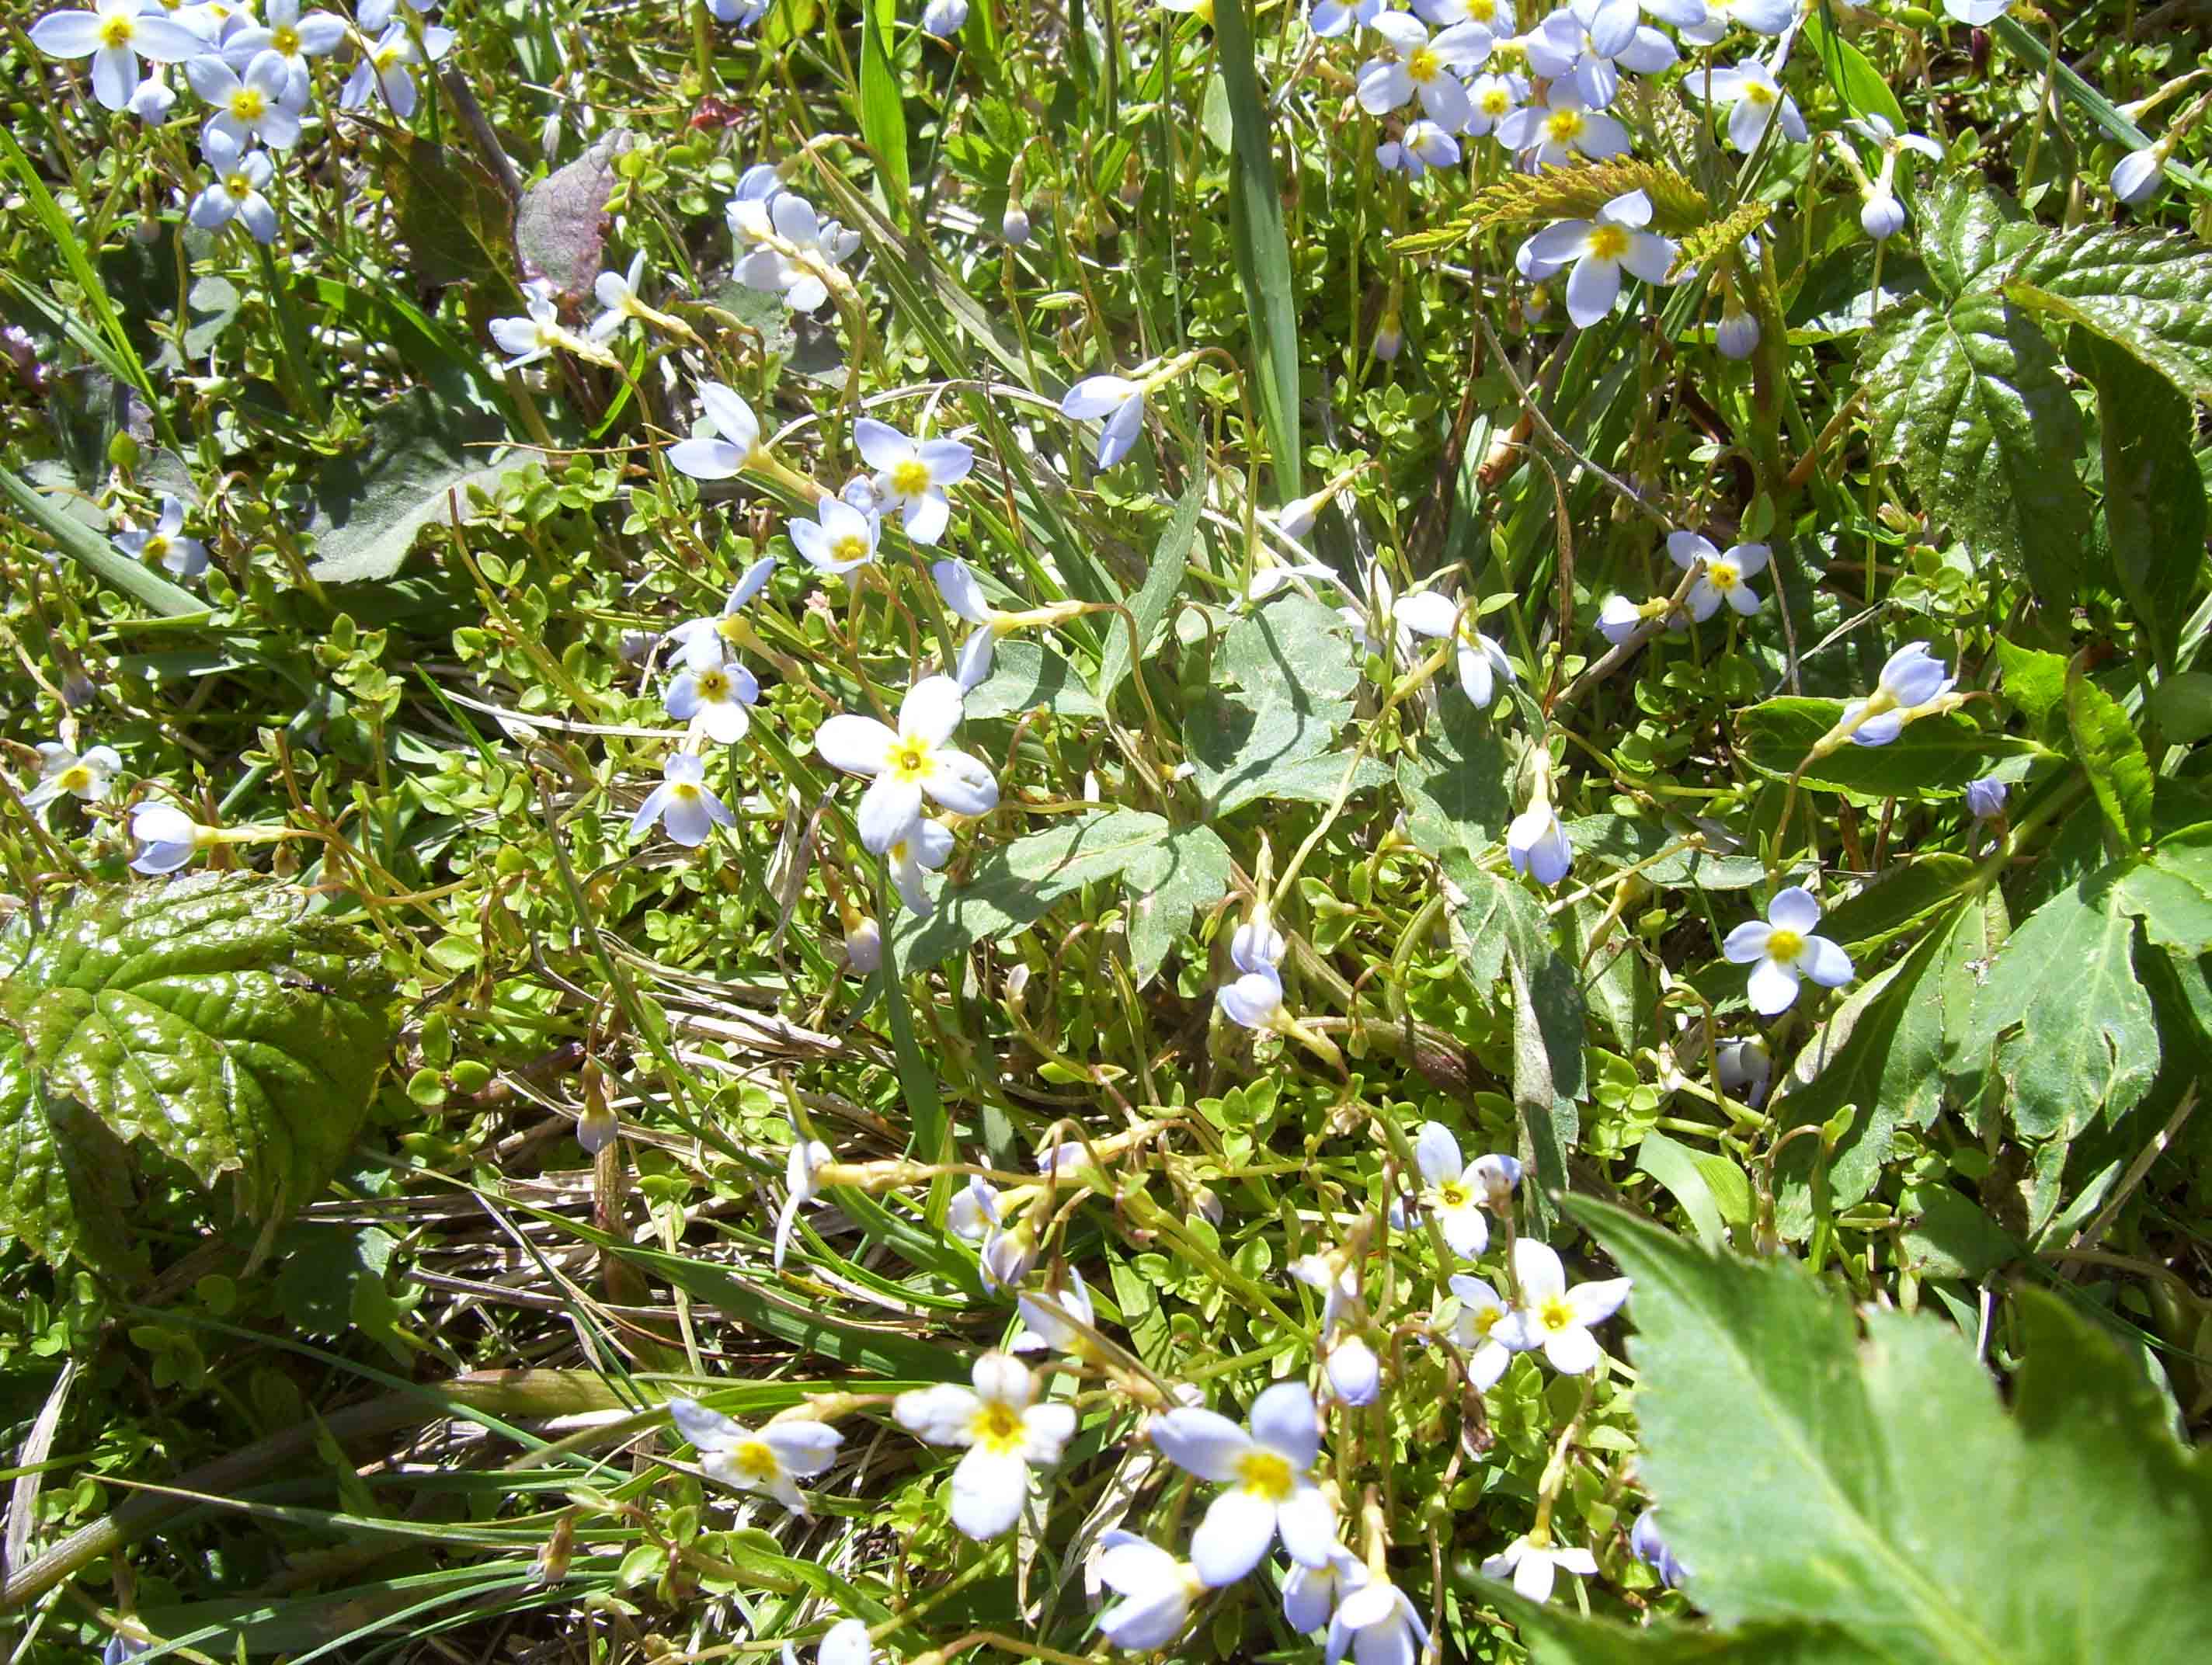 Wildflowers along trail. I saw these referred to as bluets. Taken at approx. MM 7.4.  Courtesy dlcul@conncoll.edu